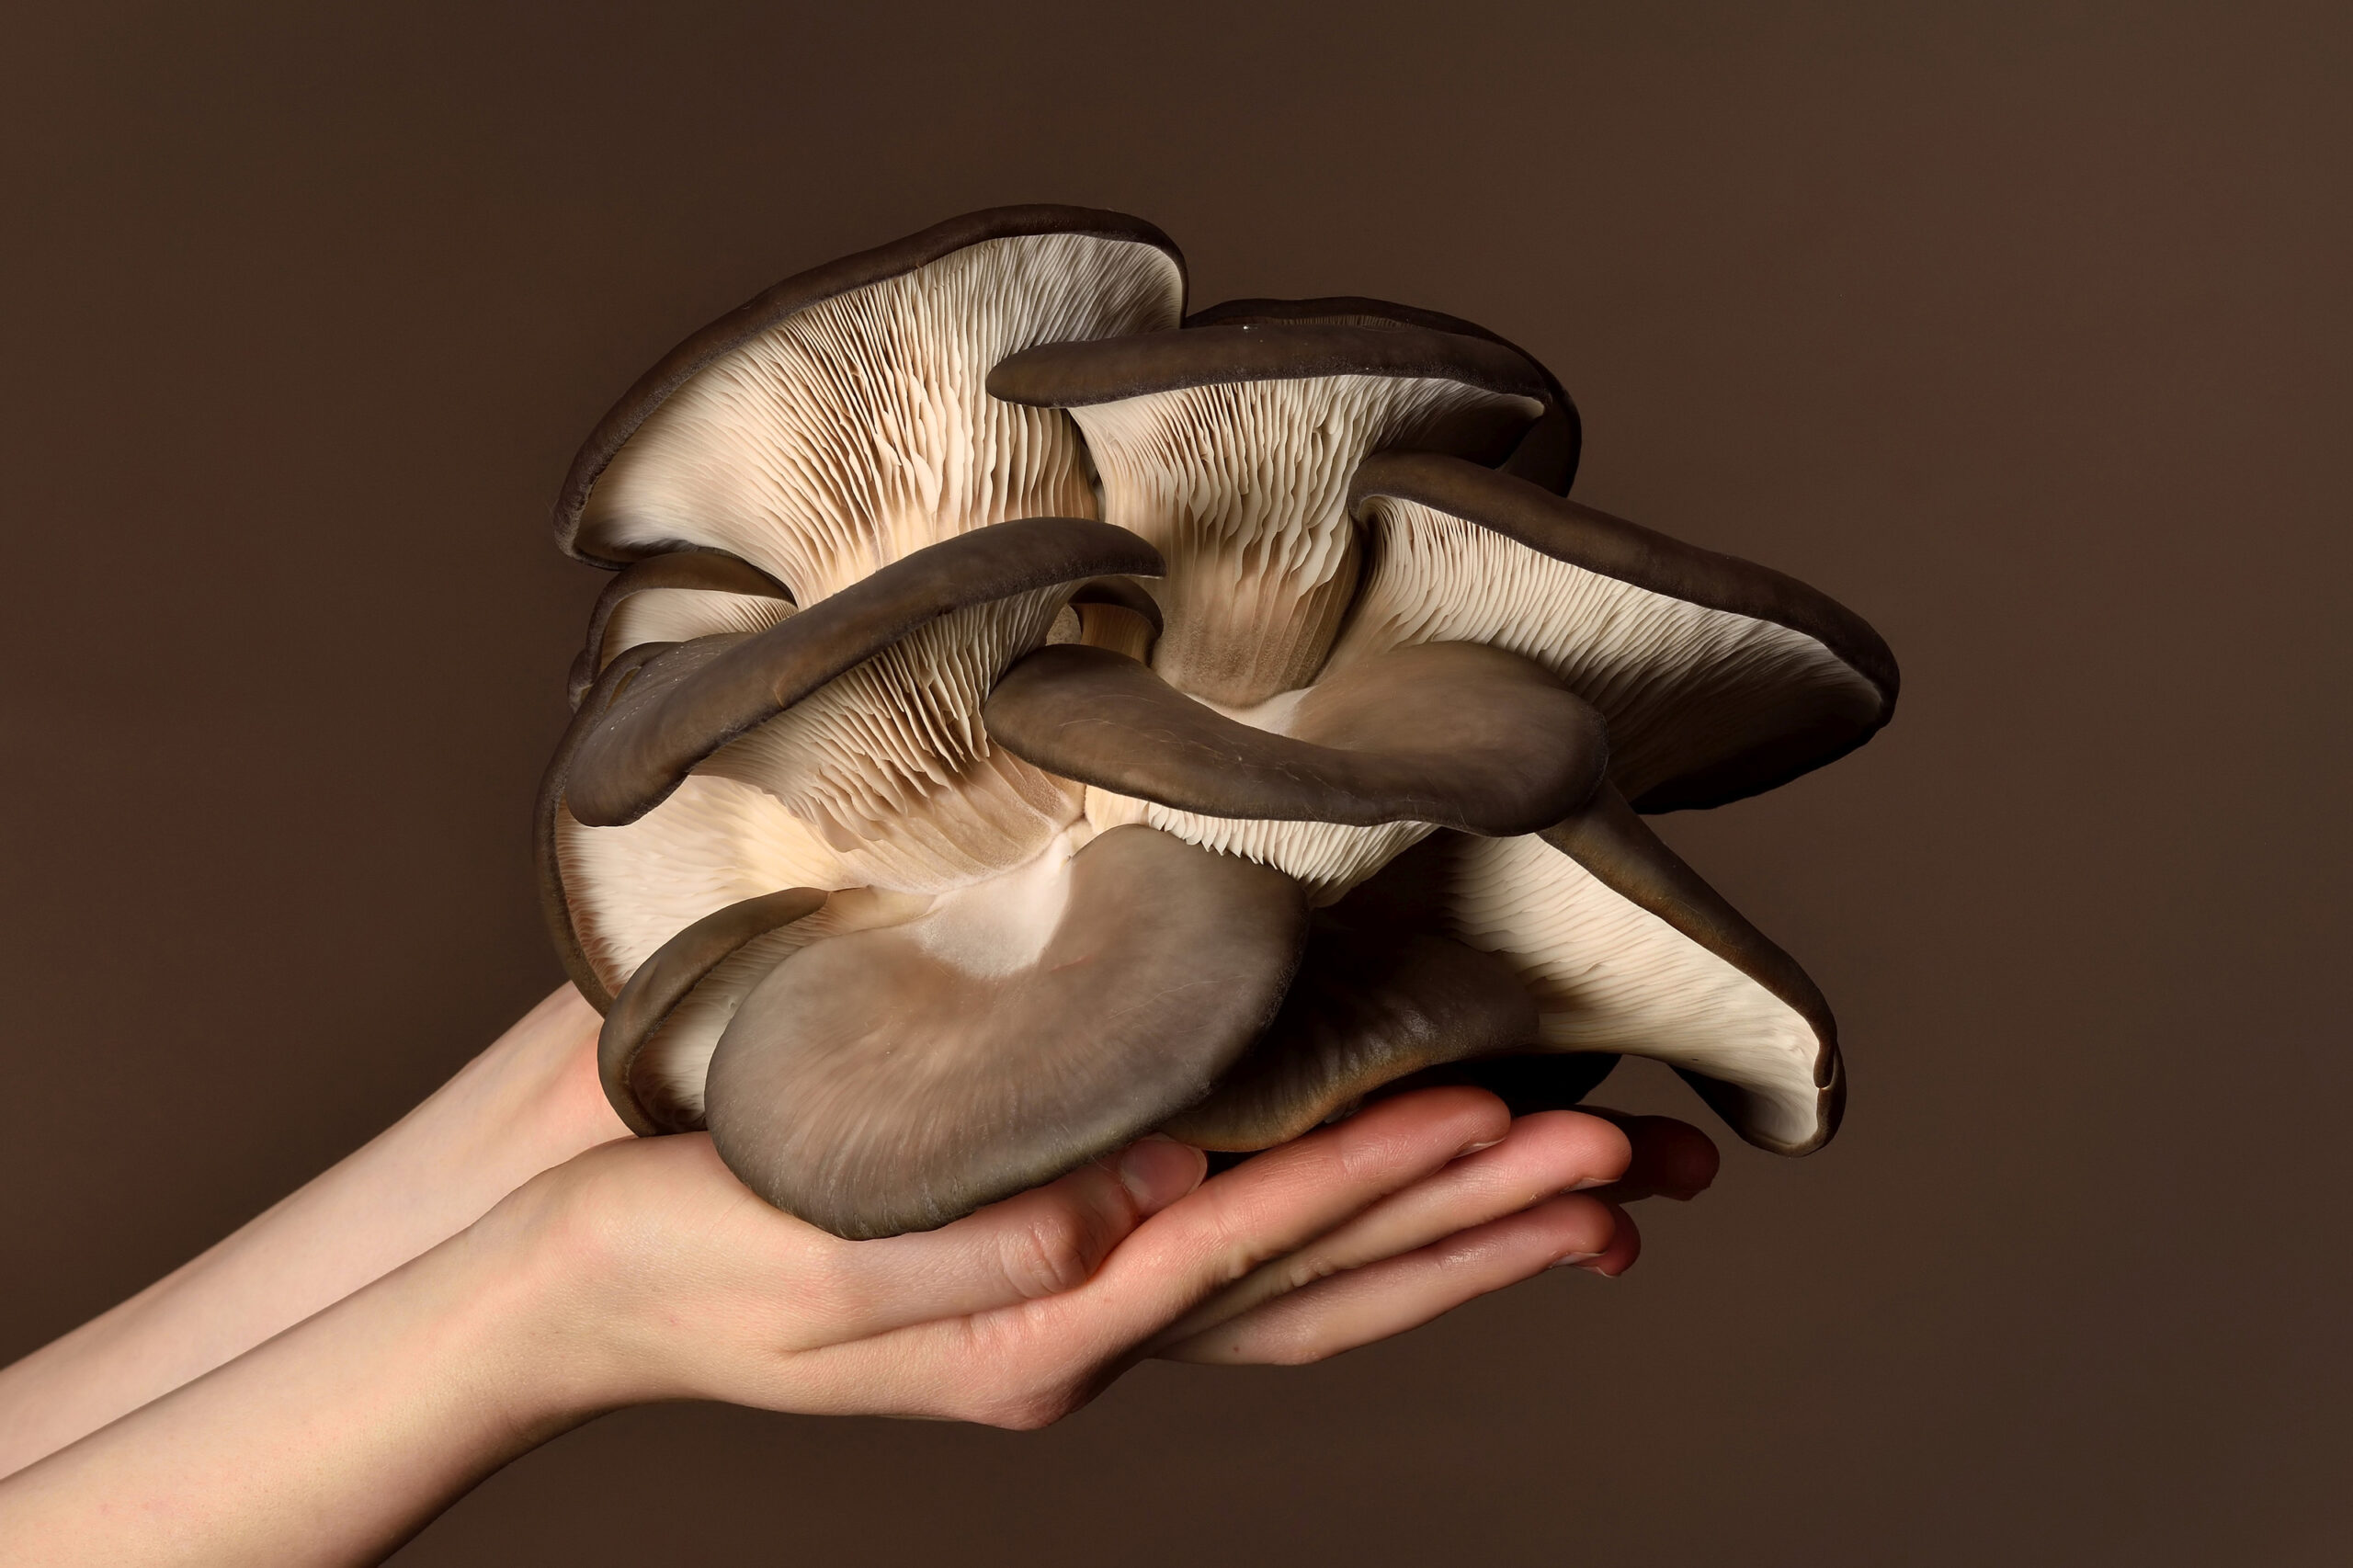 Are Pearl Oyster Mushrooms Edible?